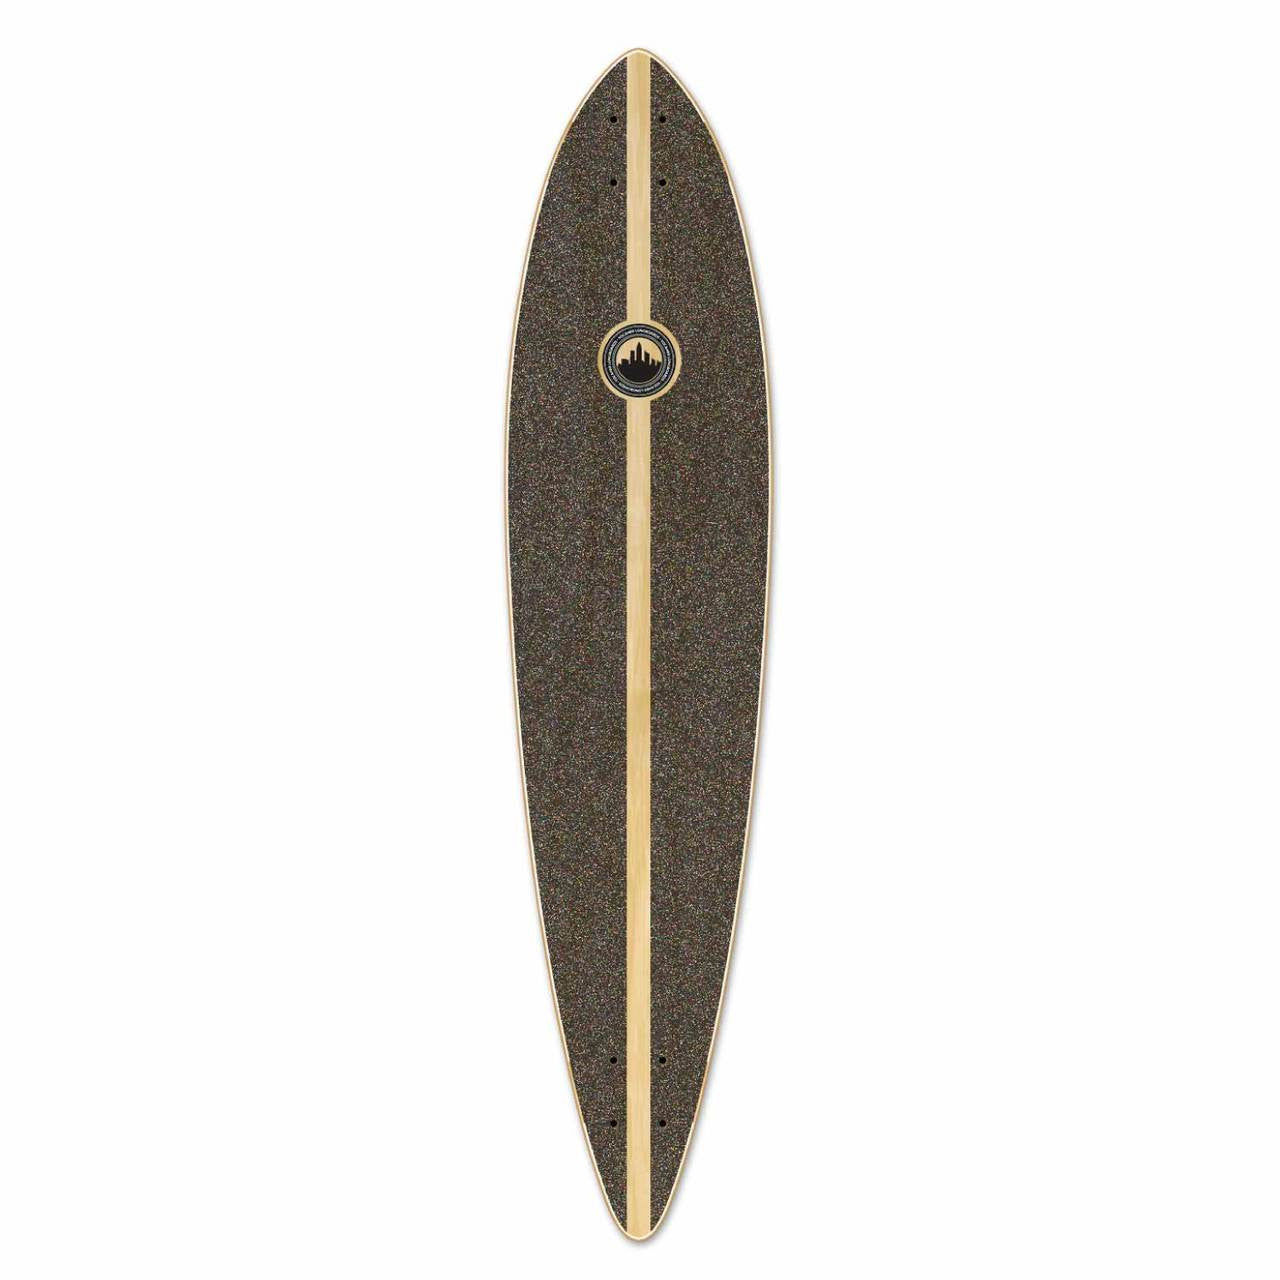 Yocaher Pintail Longboard Deck - In the Pines : Blue